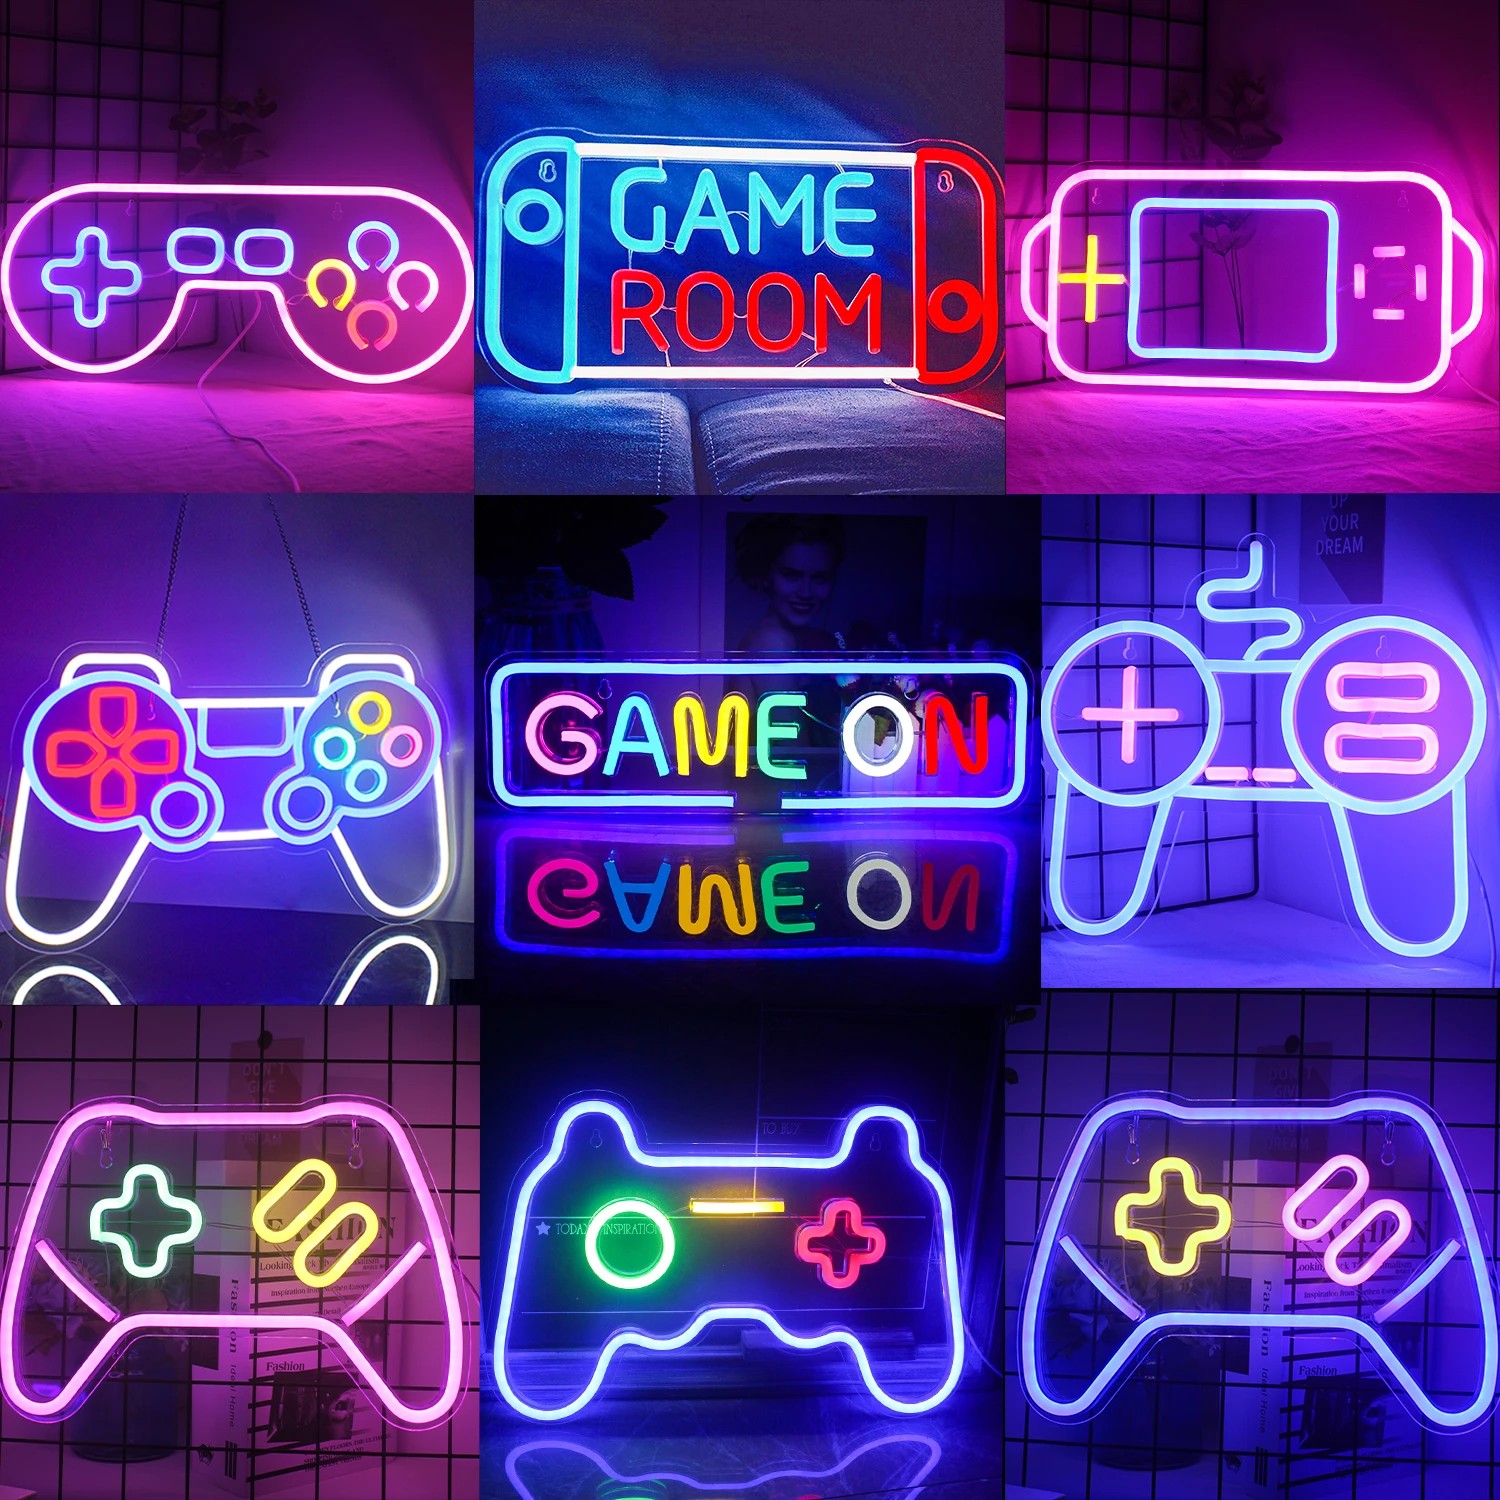 Game Led Neon Light Sign Wall Hanging Man Cave Game Room Decor Aesthetic Children's Room Studio Light Acrylic Gaming Decoration